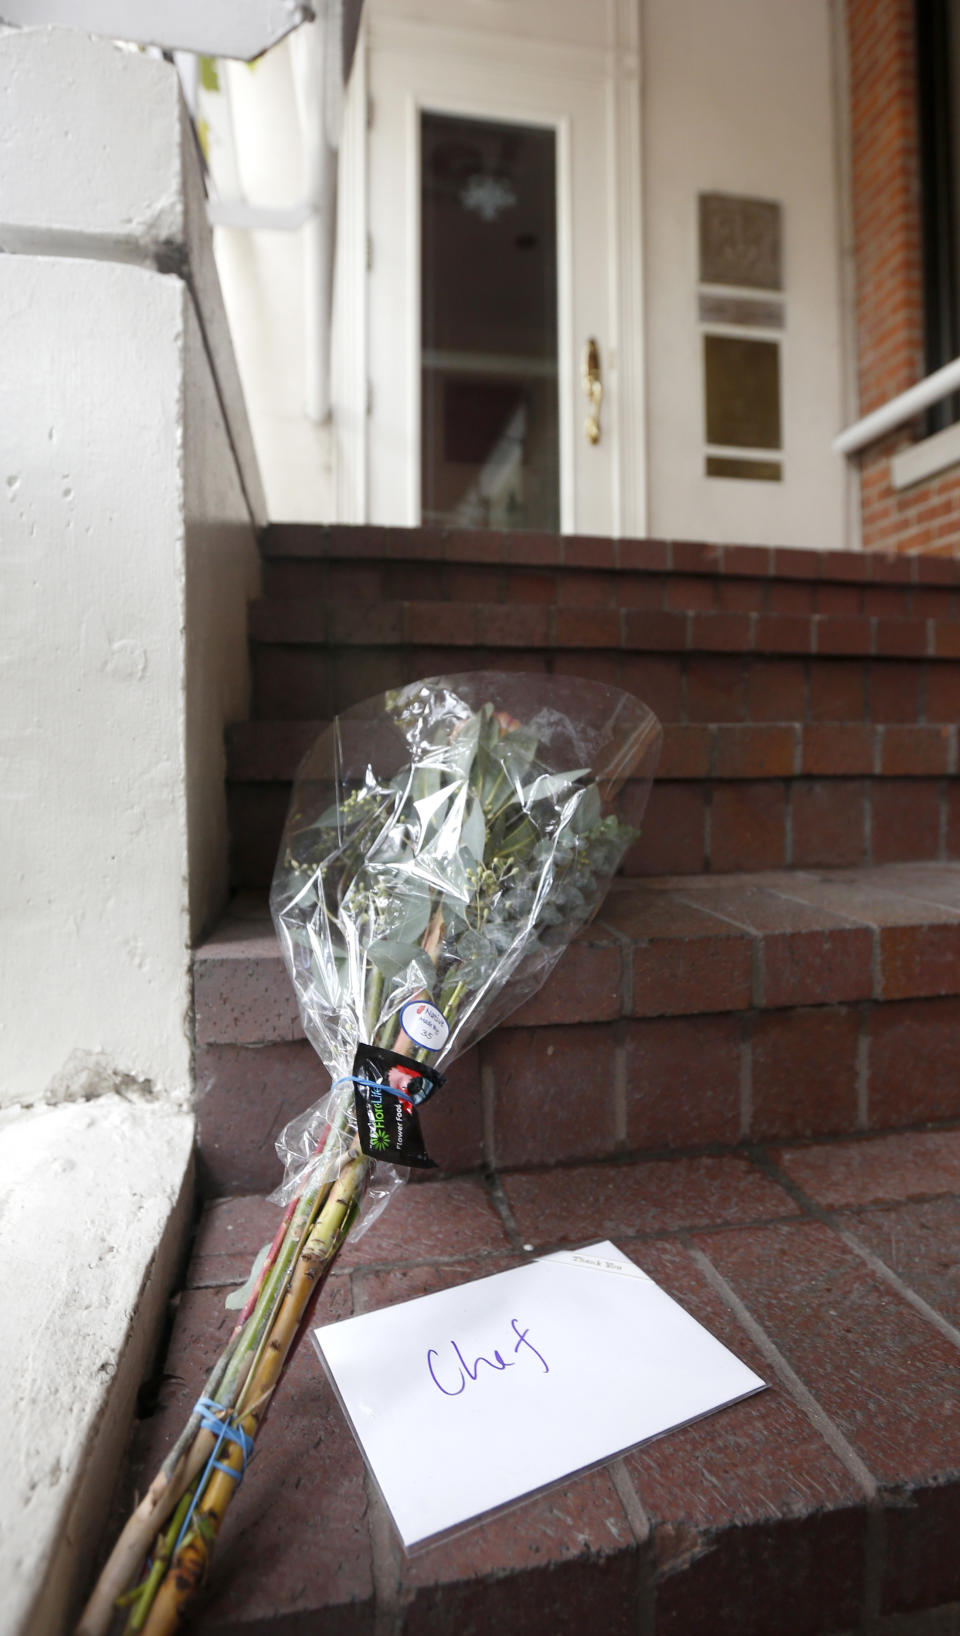 A card addressed to Chef, and a bouquet of flowers rest on the stairs to Charlie Trotter's permanently closed Chicago restaurant after reports of the chef's death Tuesday, Nov. 5, 2013, in Chicago. Trotter, 54, an award-winning chef, was a self-taught culinary master whose eponymous Chicago restaurant elevated the city’s cuisine and provided a training ground for some of the nation’s other best chefs. (AP Photo/Charles Rex Arbogast)